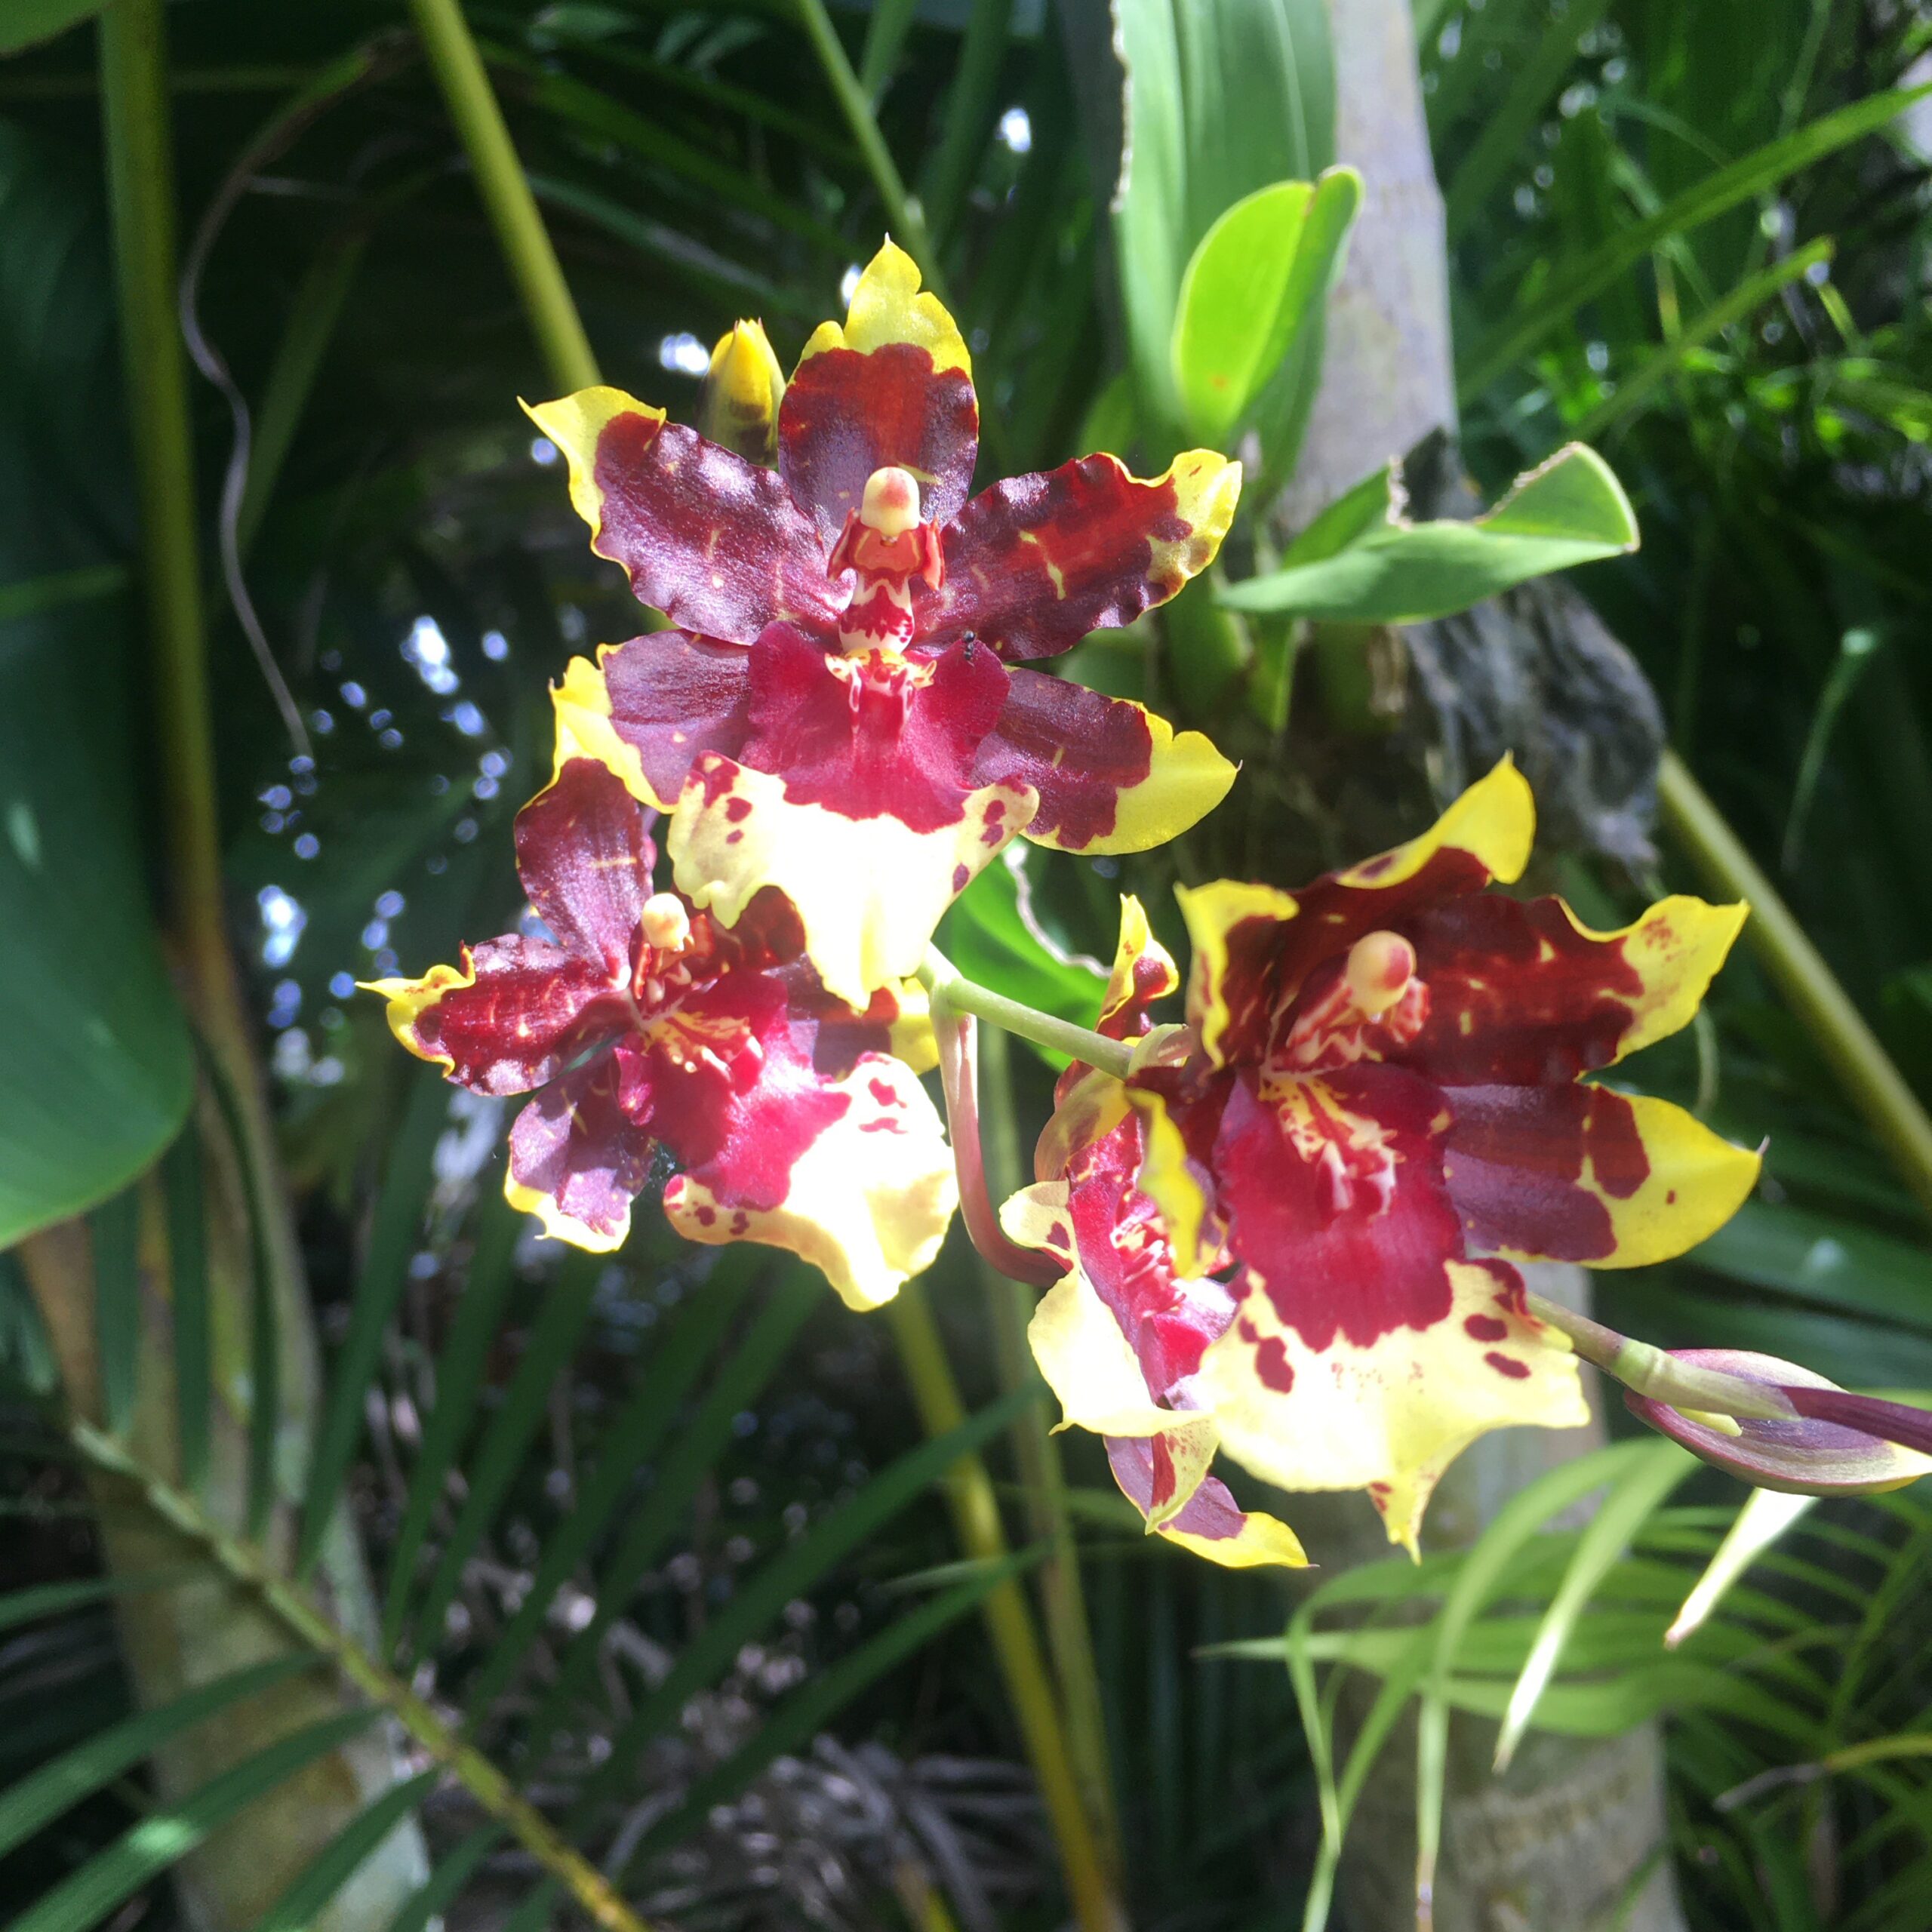 Boost growth and blooms on Epiphytic Orchids with beneficial Compost Tea